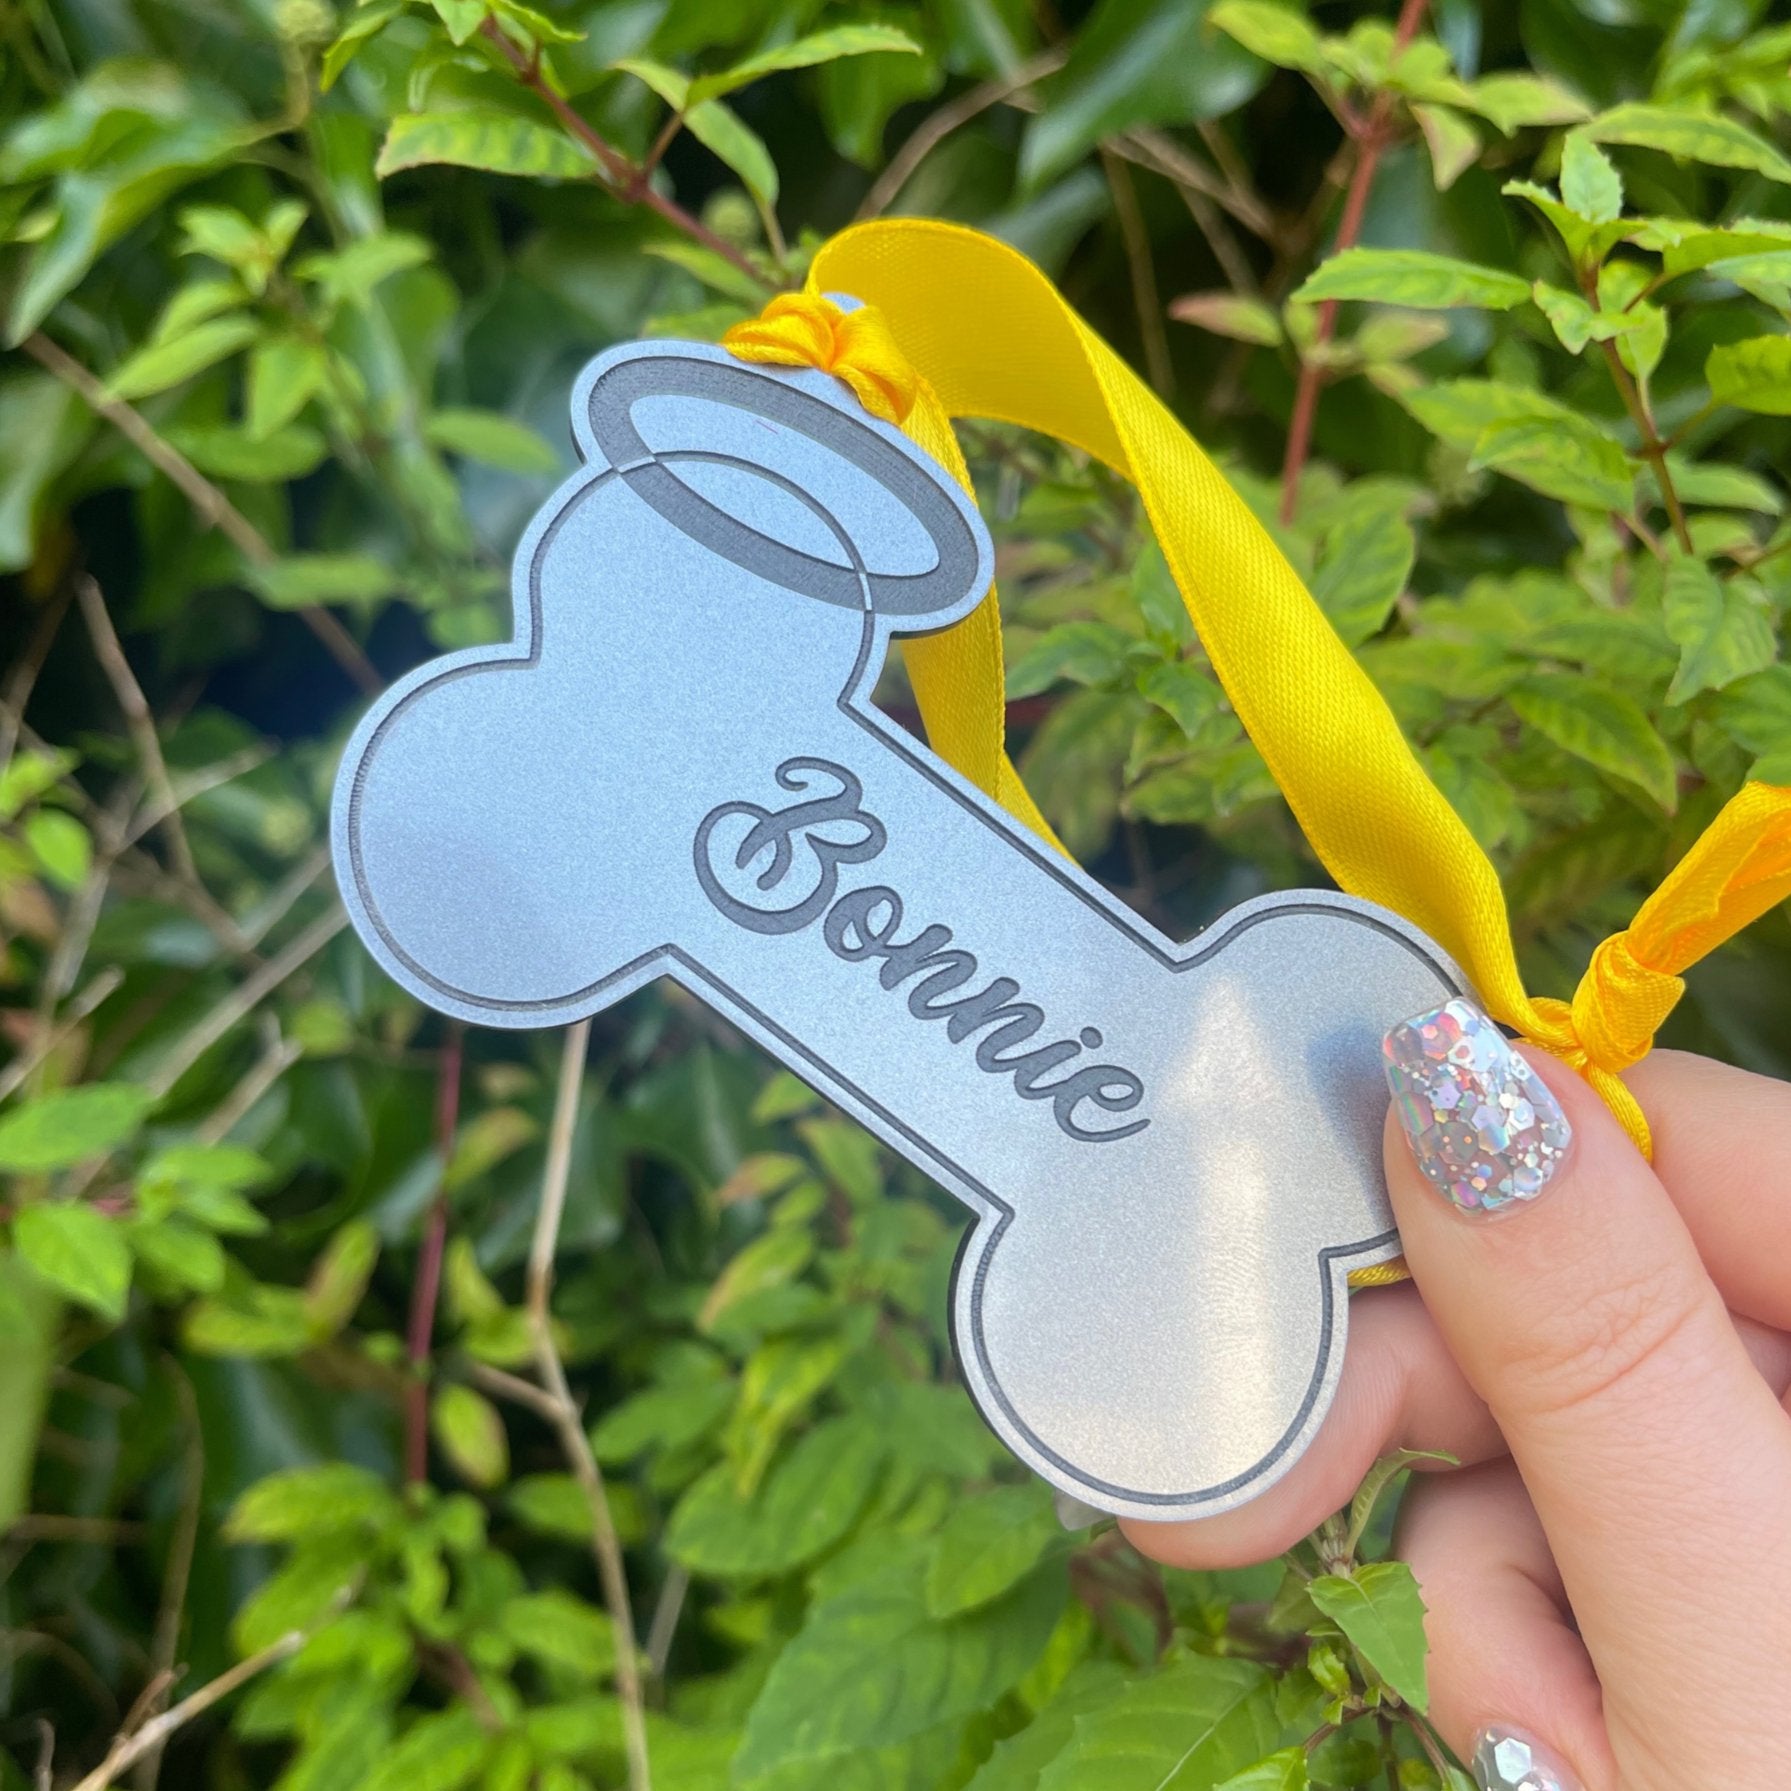 Dog Remembrance Hanging Bone Keepsake: An acrylic bone-shaped memento suspended by a yellow ribbon, featuring black engraving and a halo design. Preserve the memory of your dear dog for years to come with their personalized name on this 3mm thick keepsake.